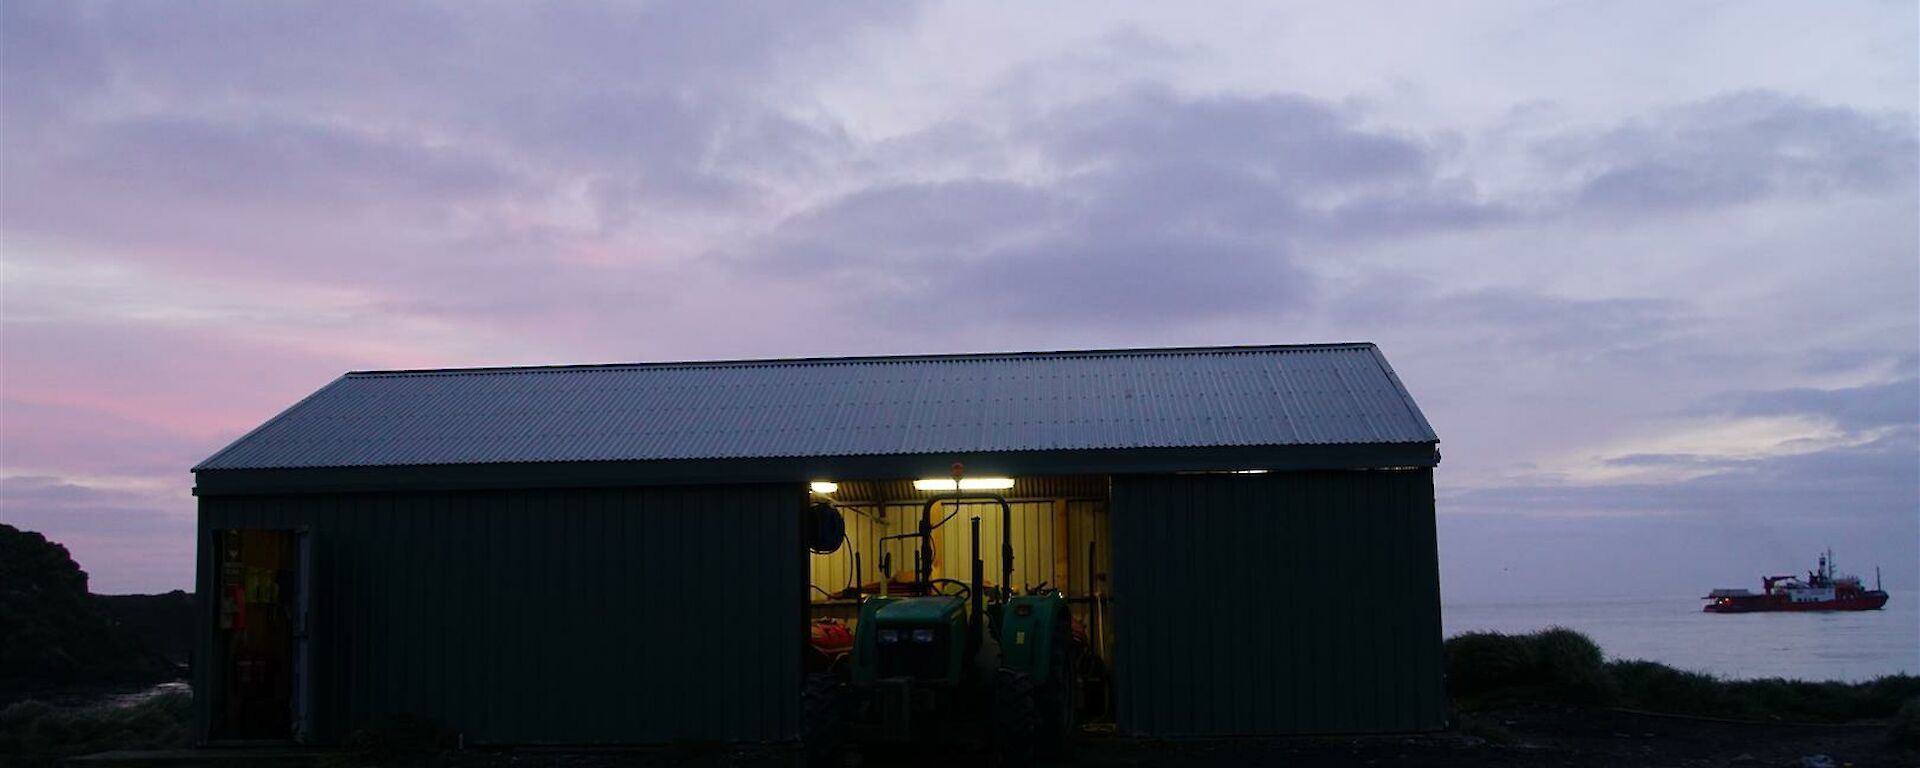 A pink sunrise sky over the boat shed with L'Astrolabe in the background